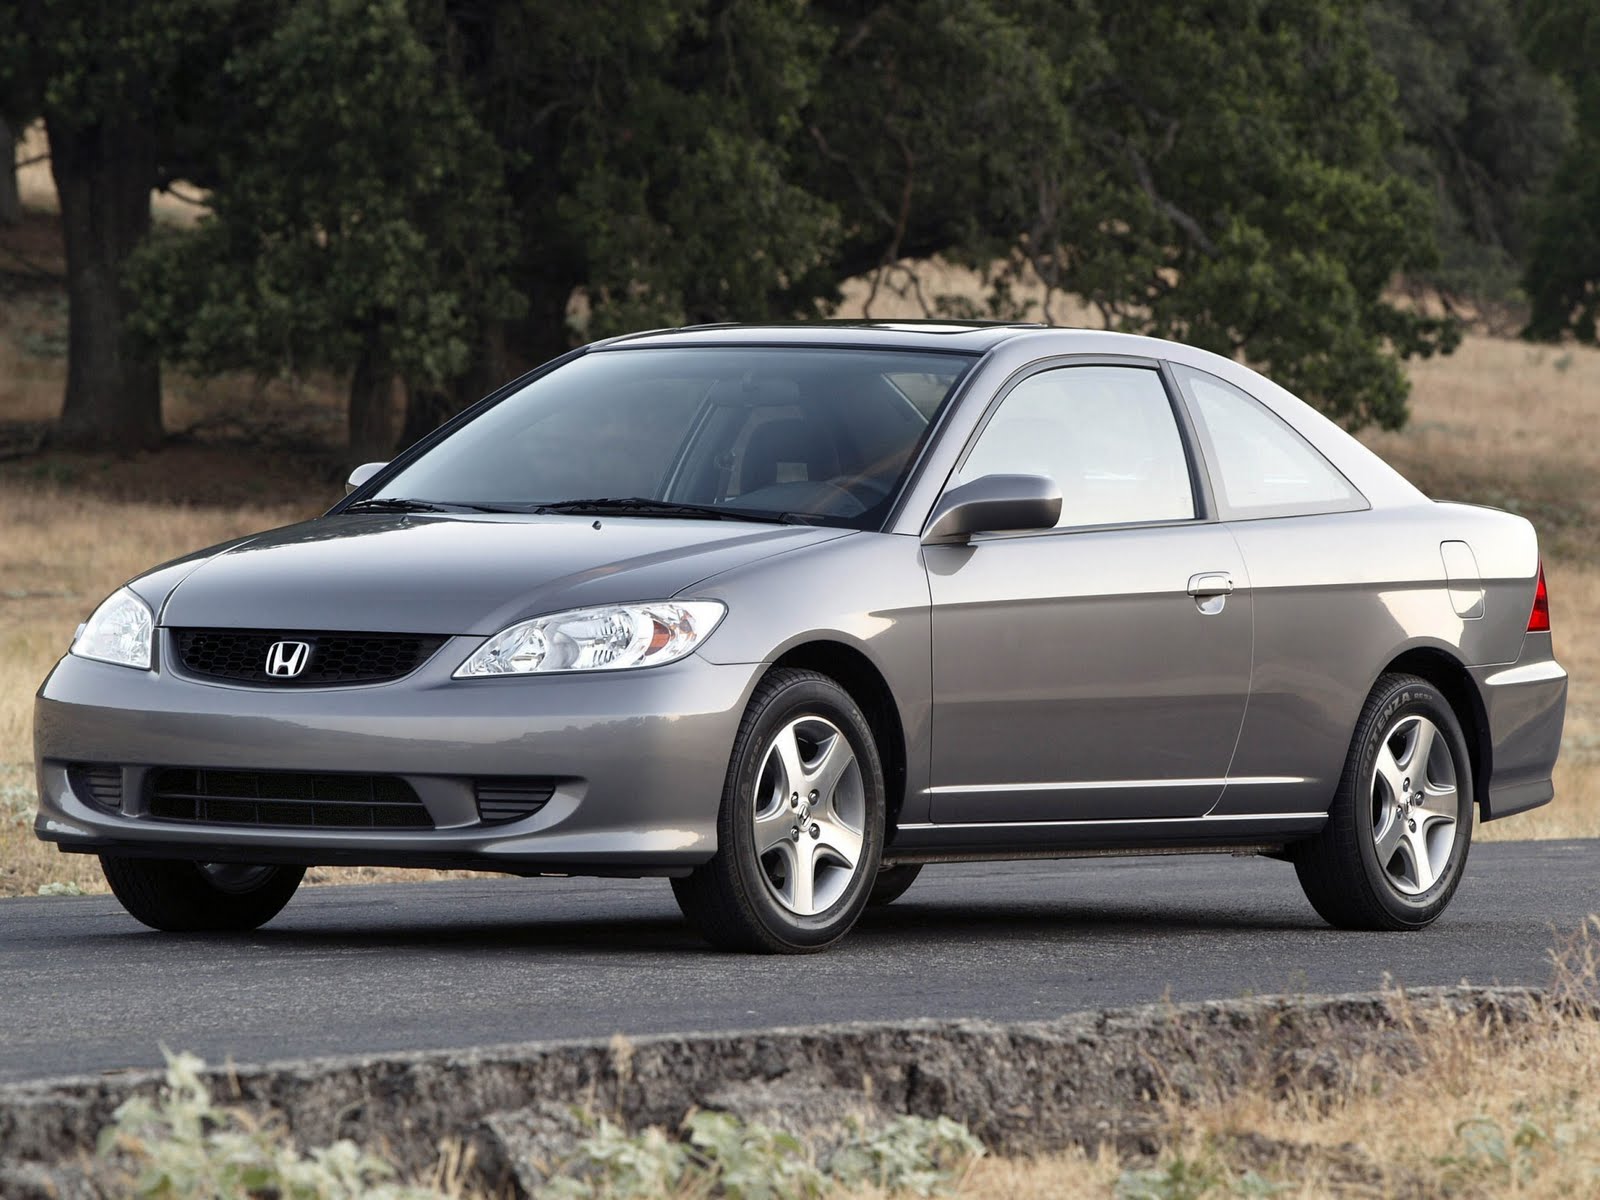 Honda civic 2005 | Best Cars For You